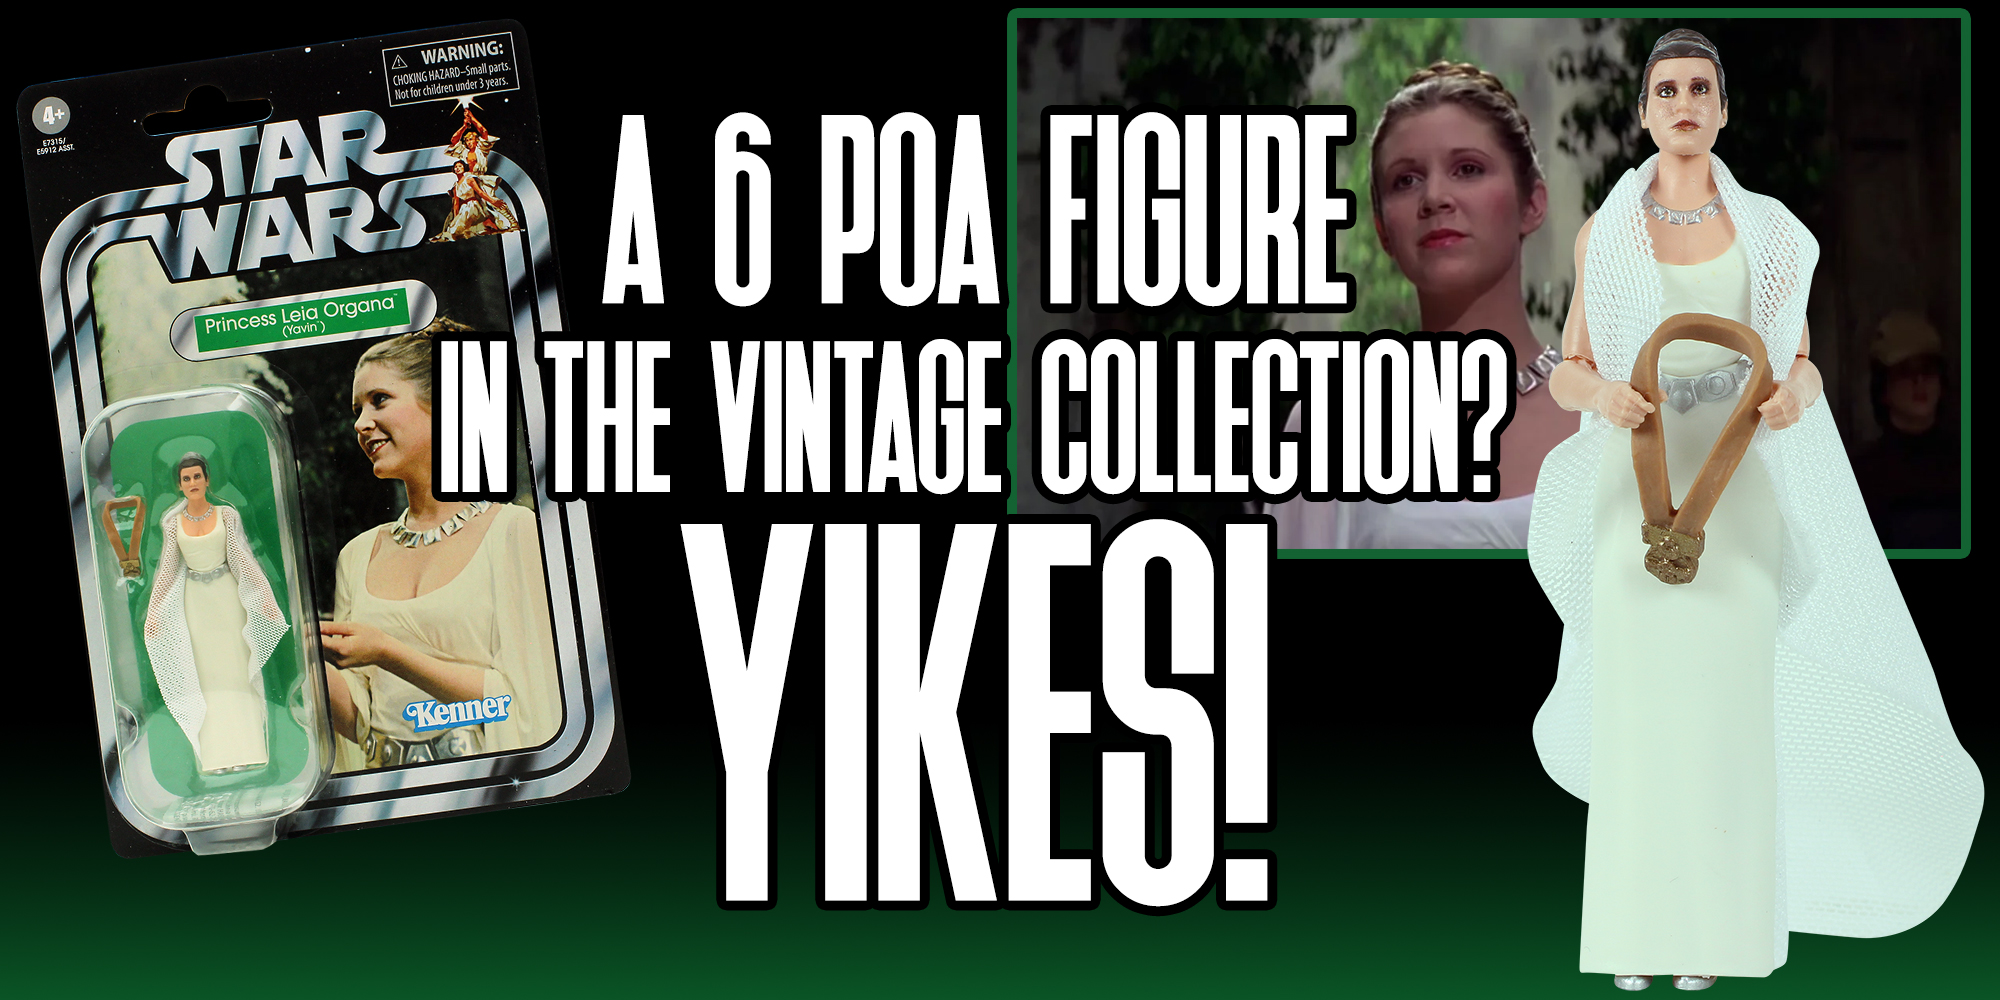 LEIA HAS ONLY 6 POINTS OF ARTICULATION?! YIKES!